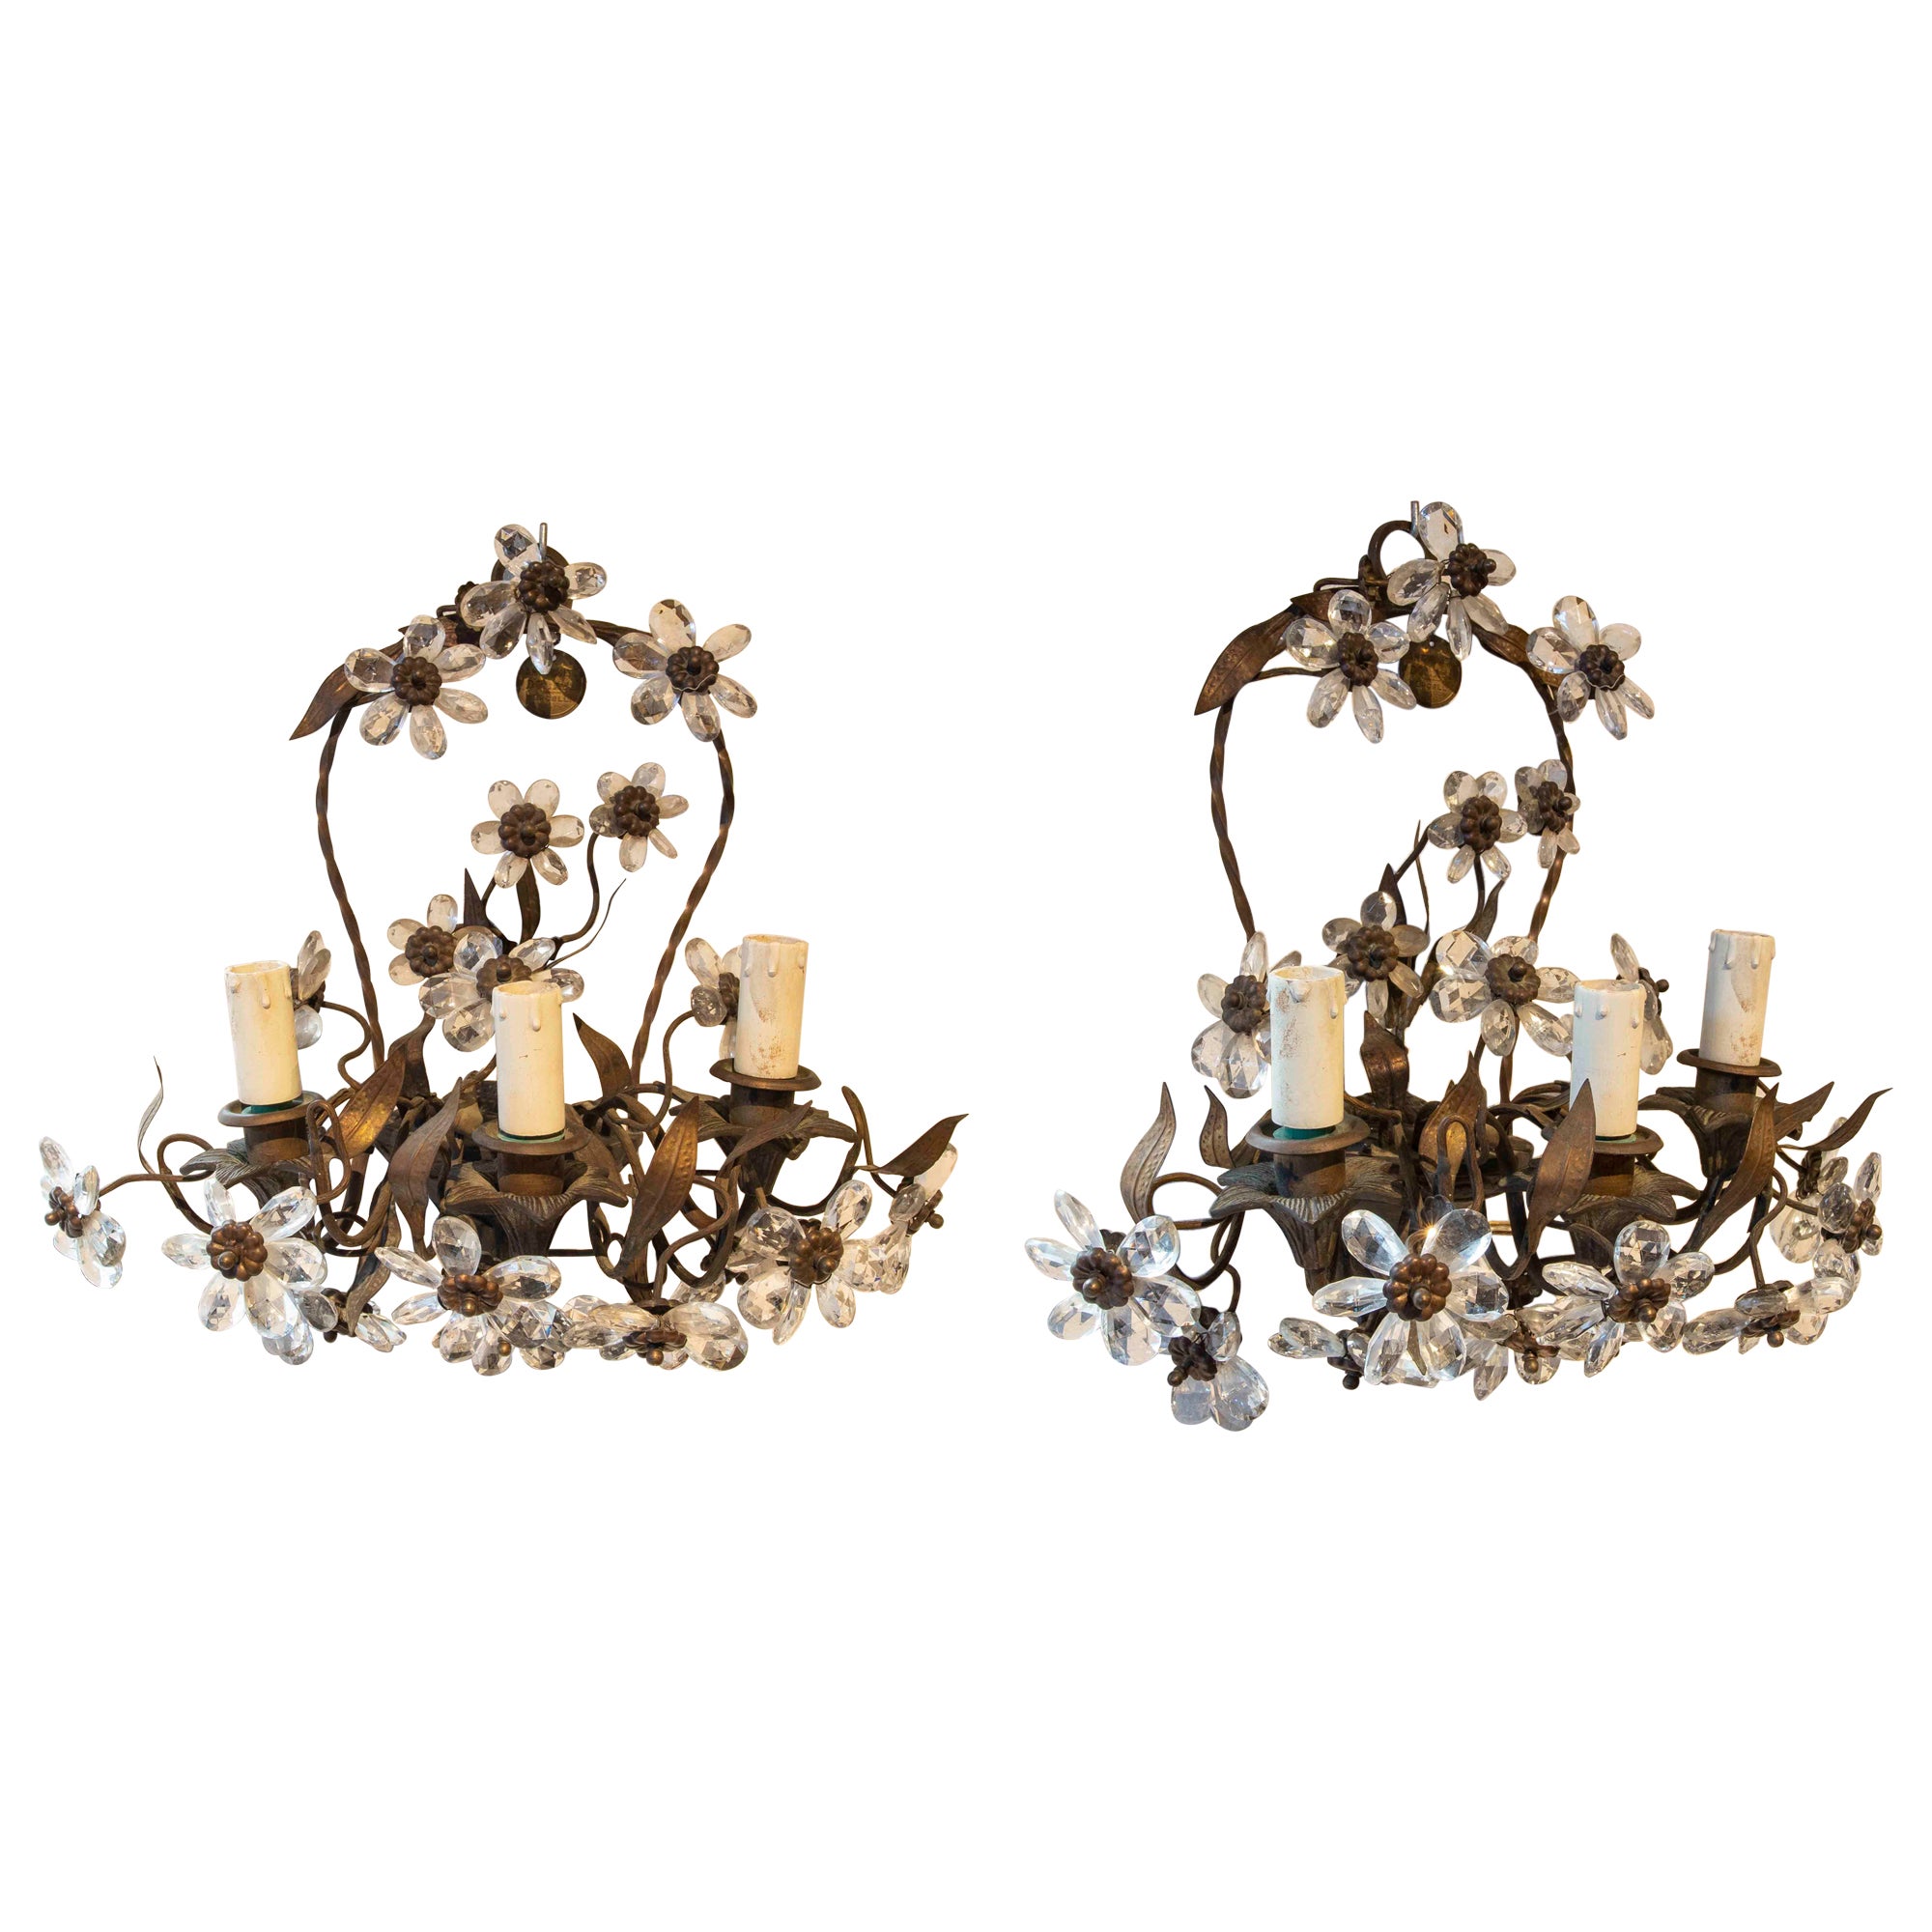 19th Century French Pair of Sconces in Bronze, Metal and Crystal Flowers